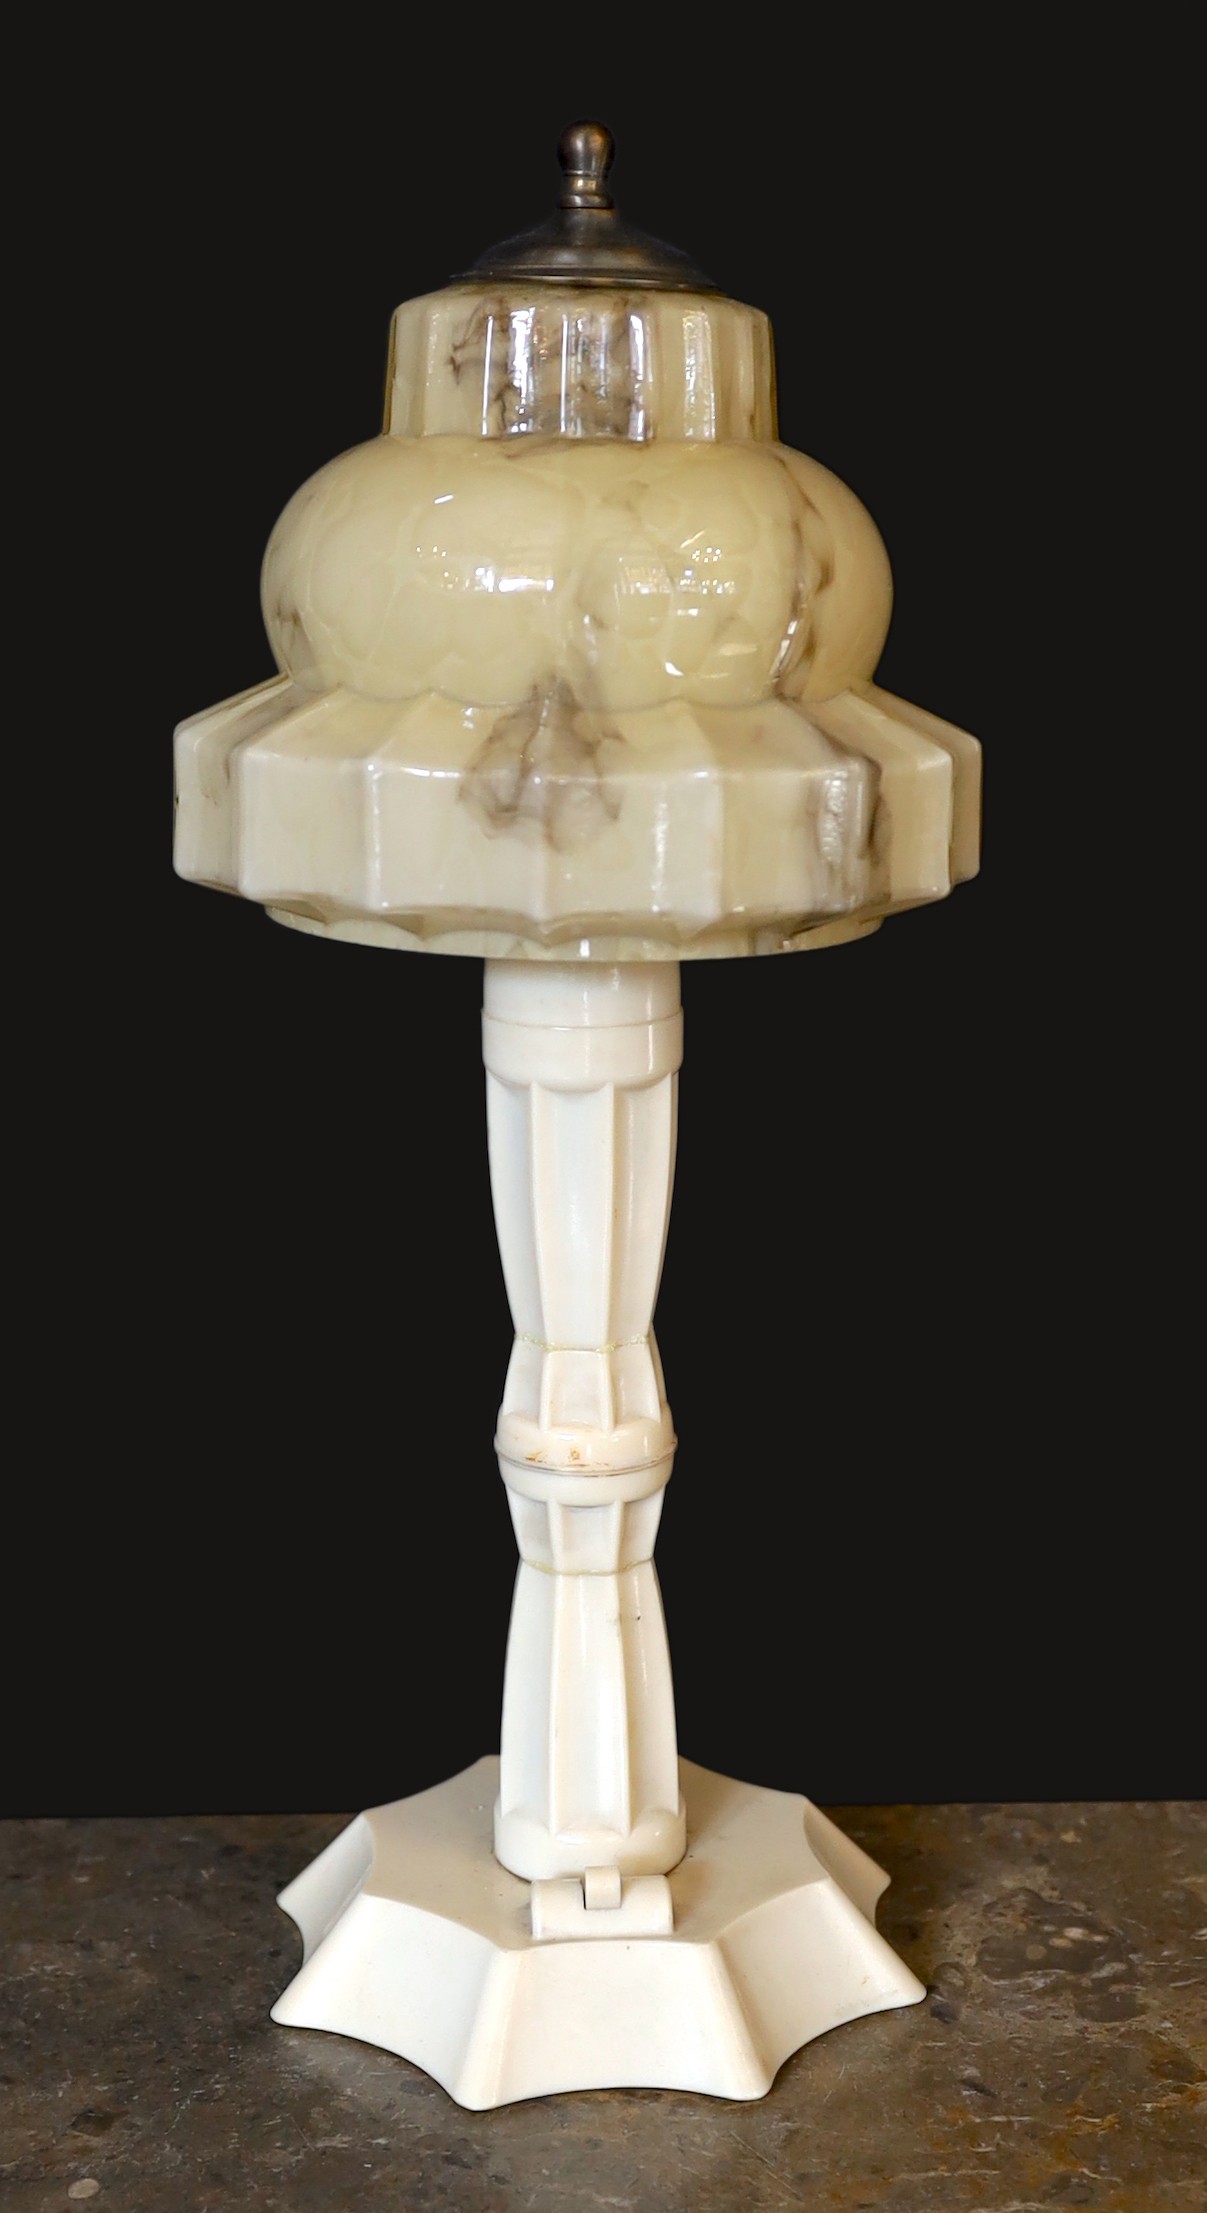 A Klampshade ‘Geni the lamp’ Bakelite table lamp, with associated marbled glass shade, height 35cm